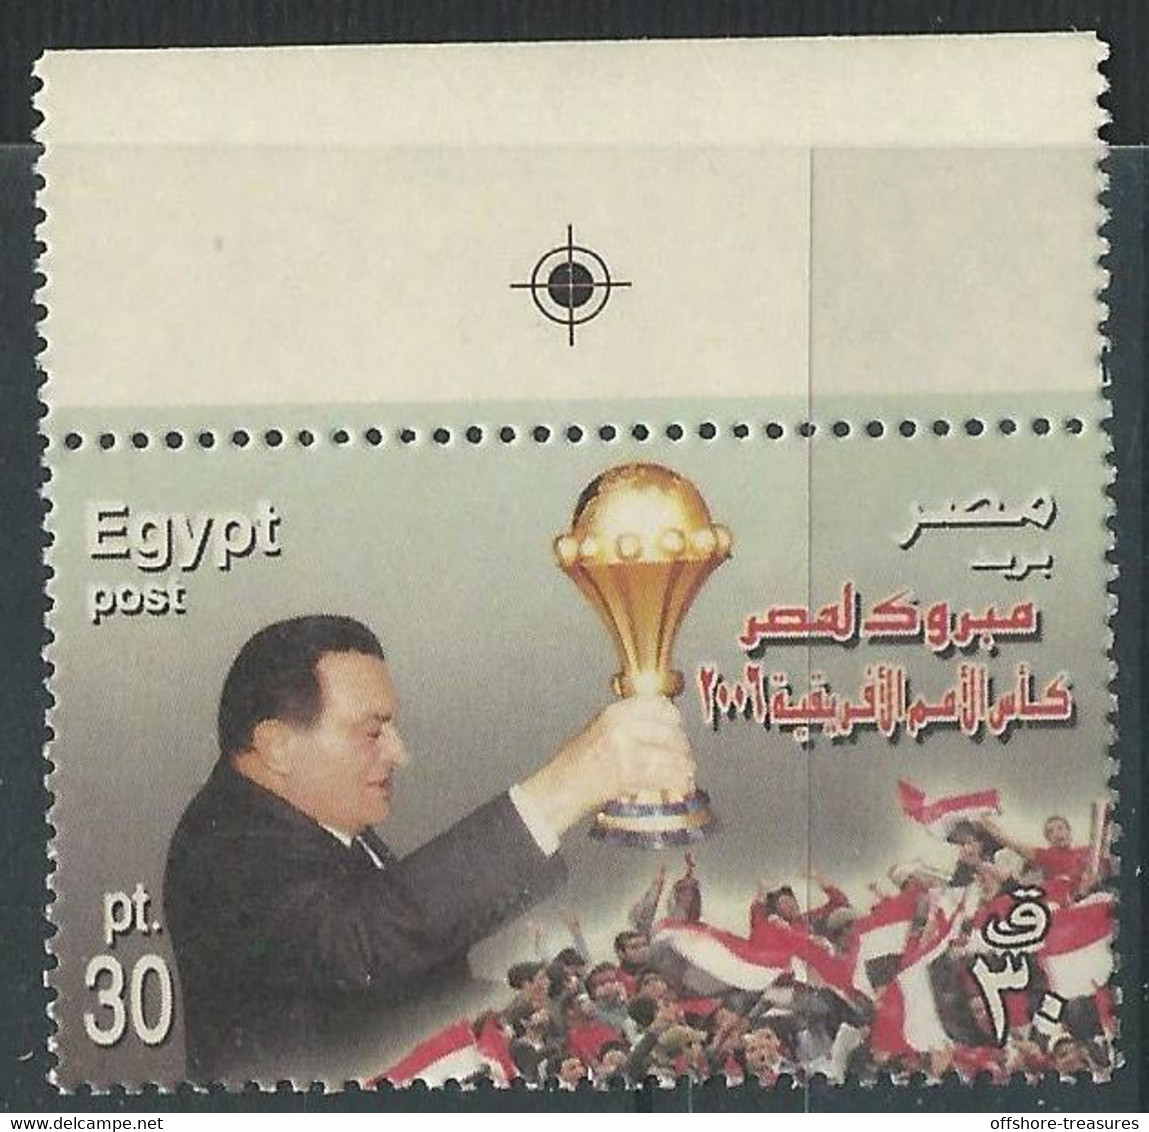 EGYPT STAMP 2006 SG 2429 President MUBARAK Holding TROPHY - African Nations Football Cup Champions - MNH - Nuevos